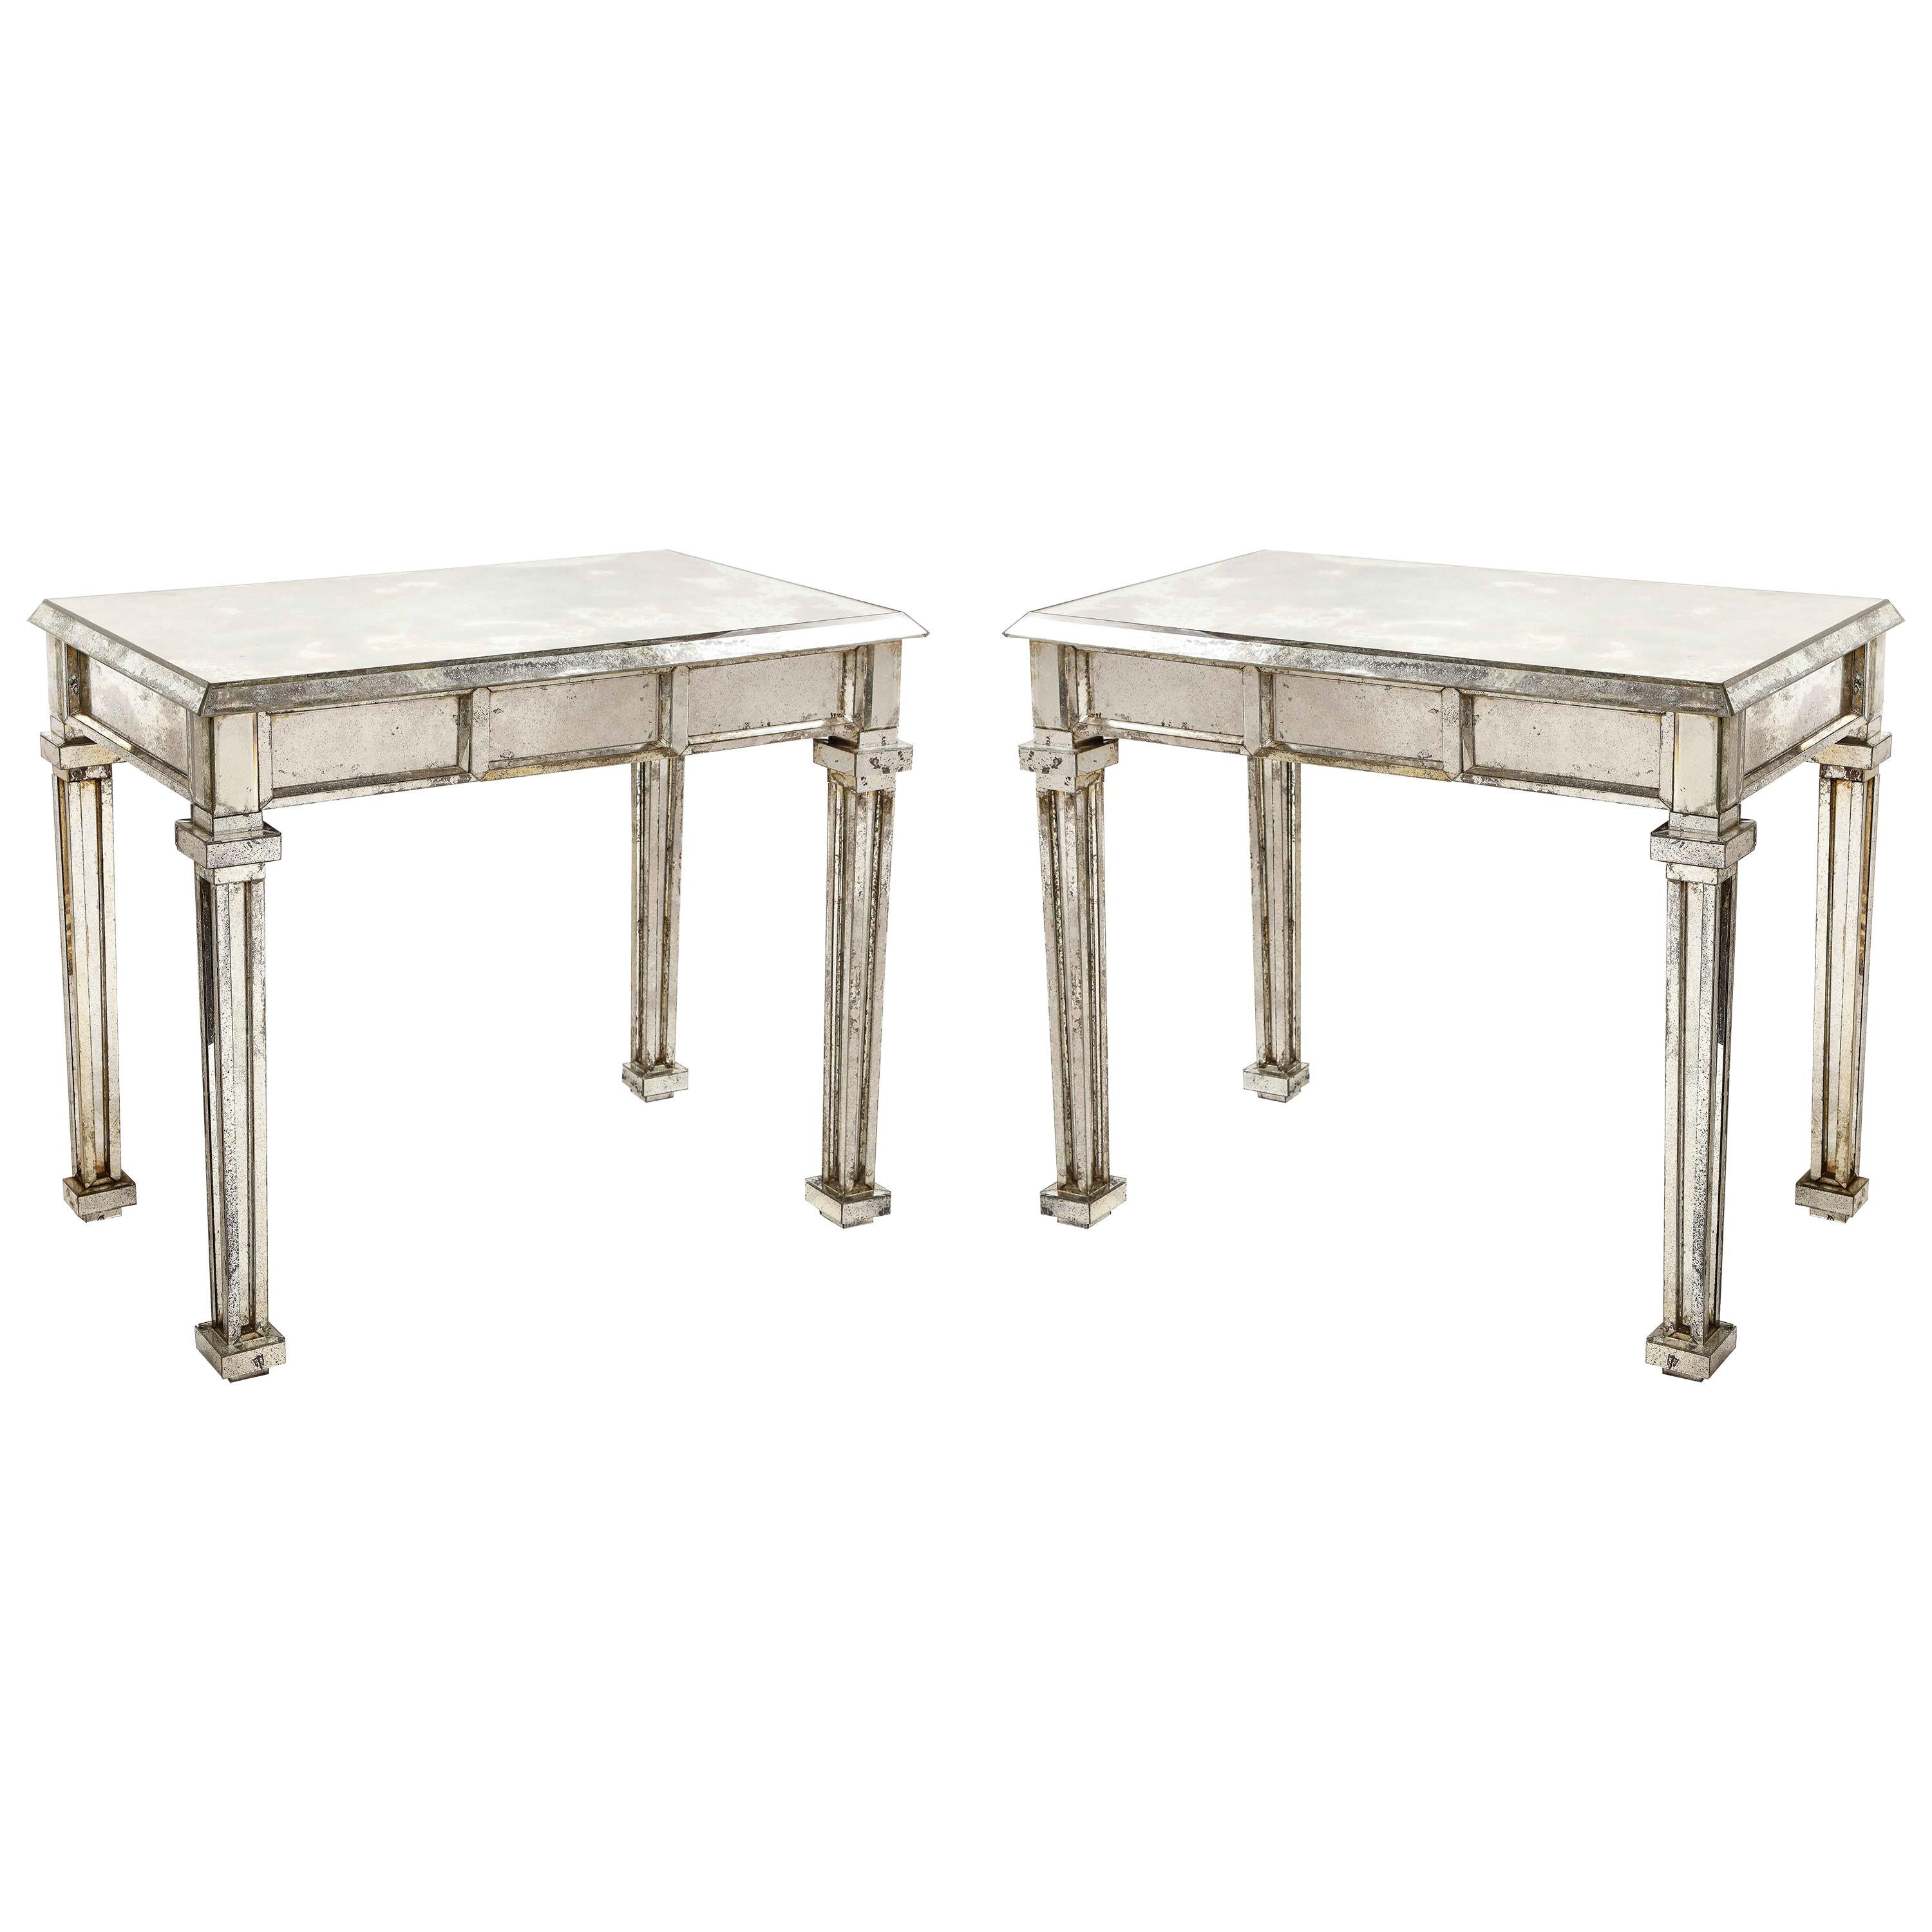 Pair of Unique Antique French Art Deco Rectangular Form Mirrored Console Tables